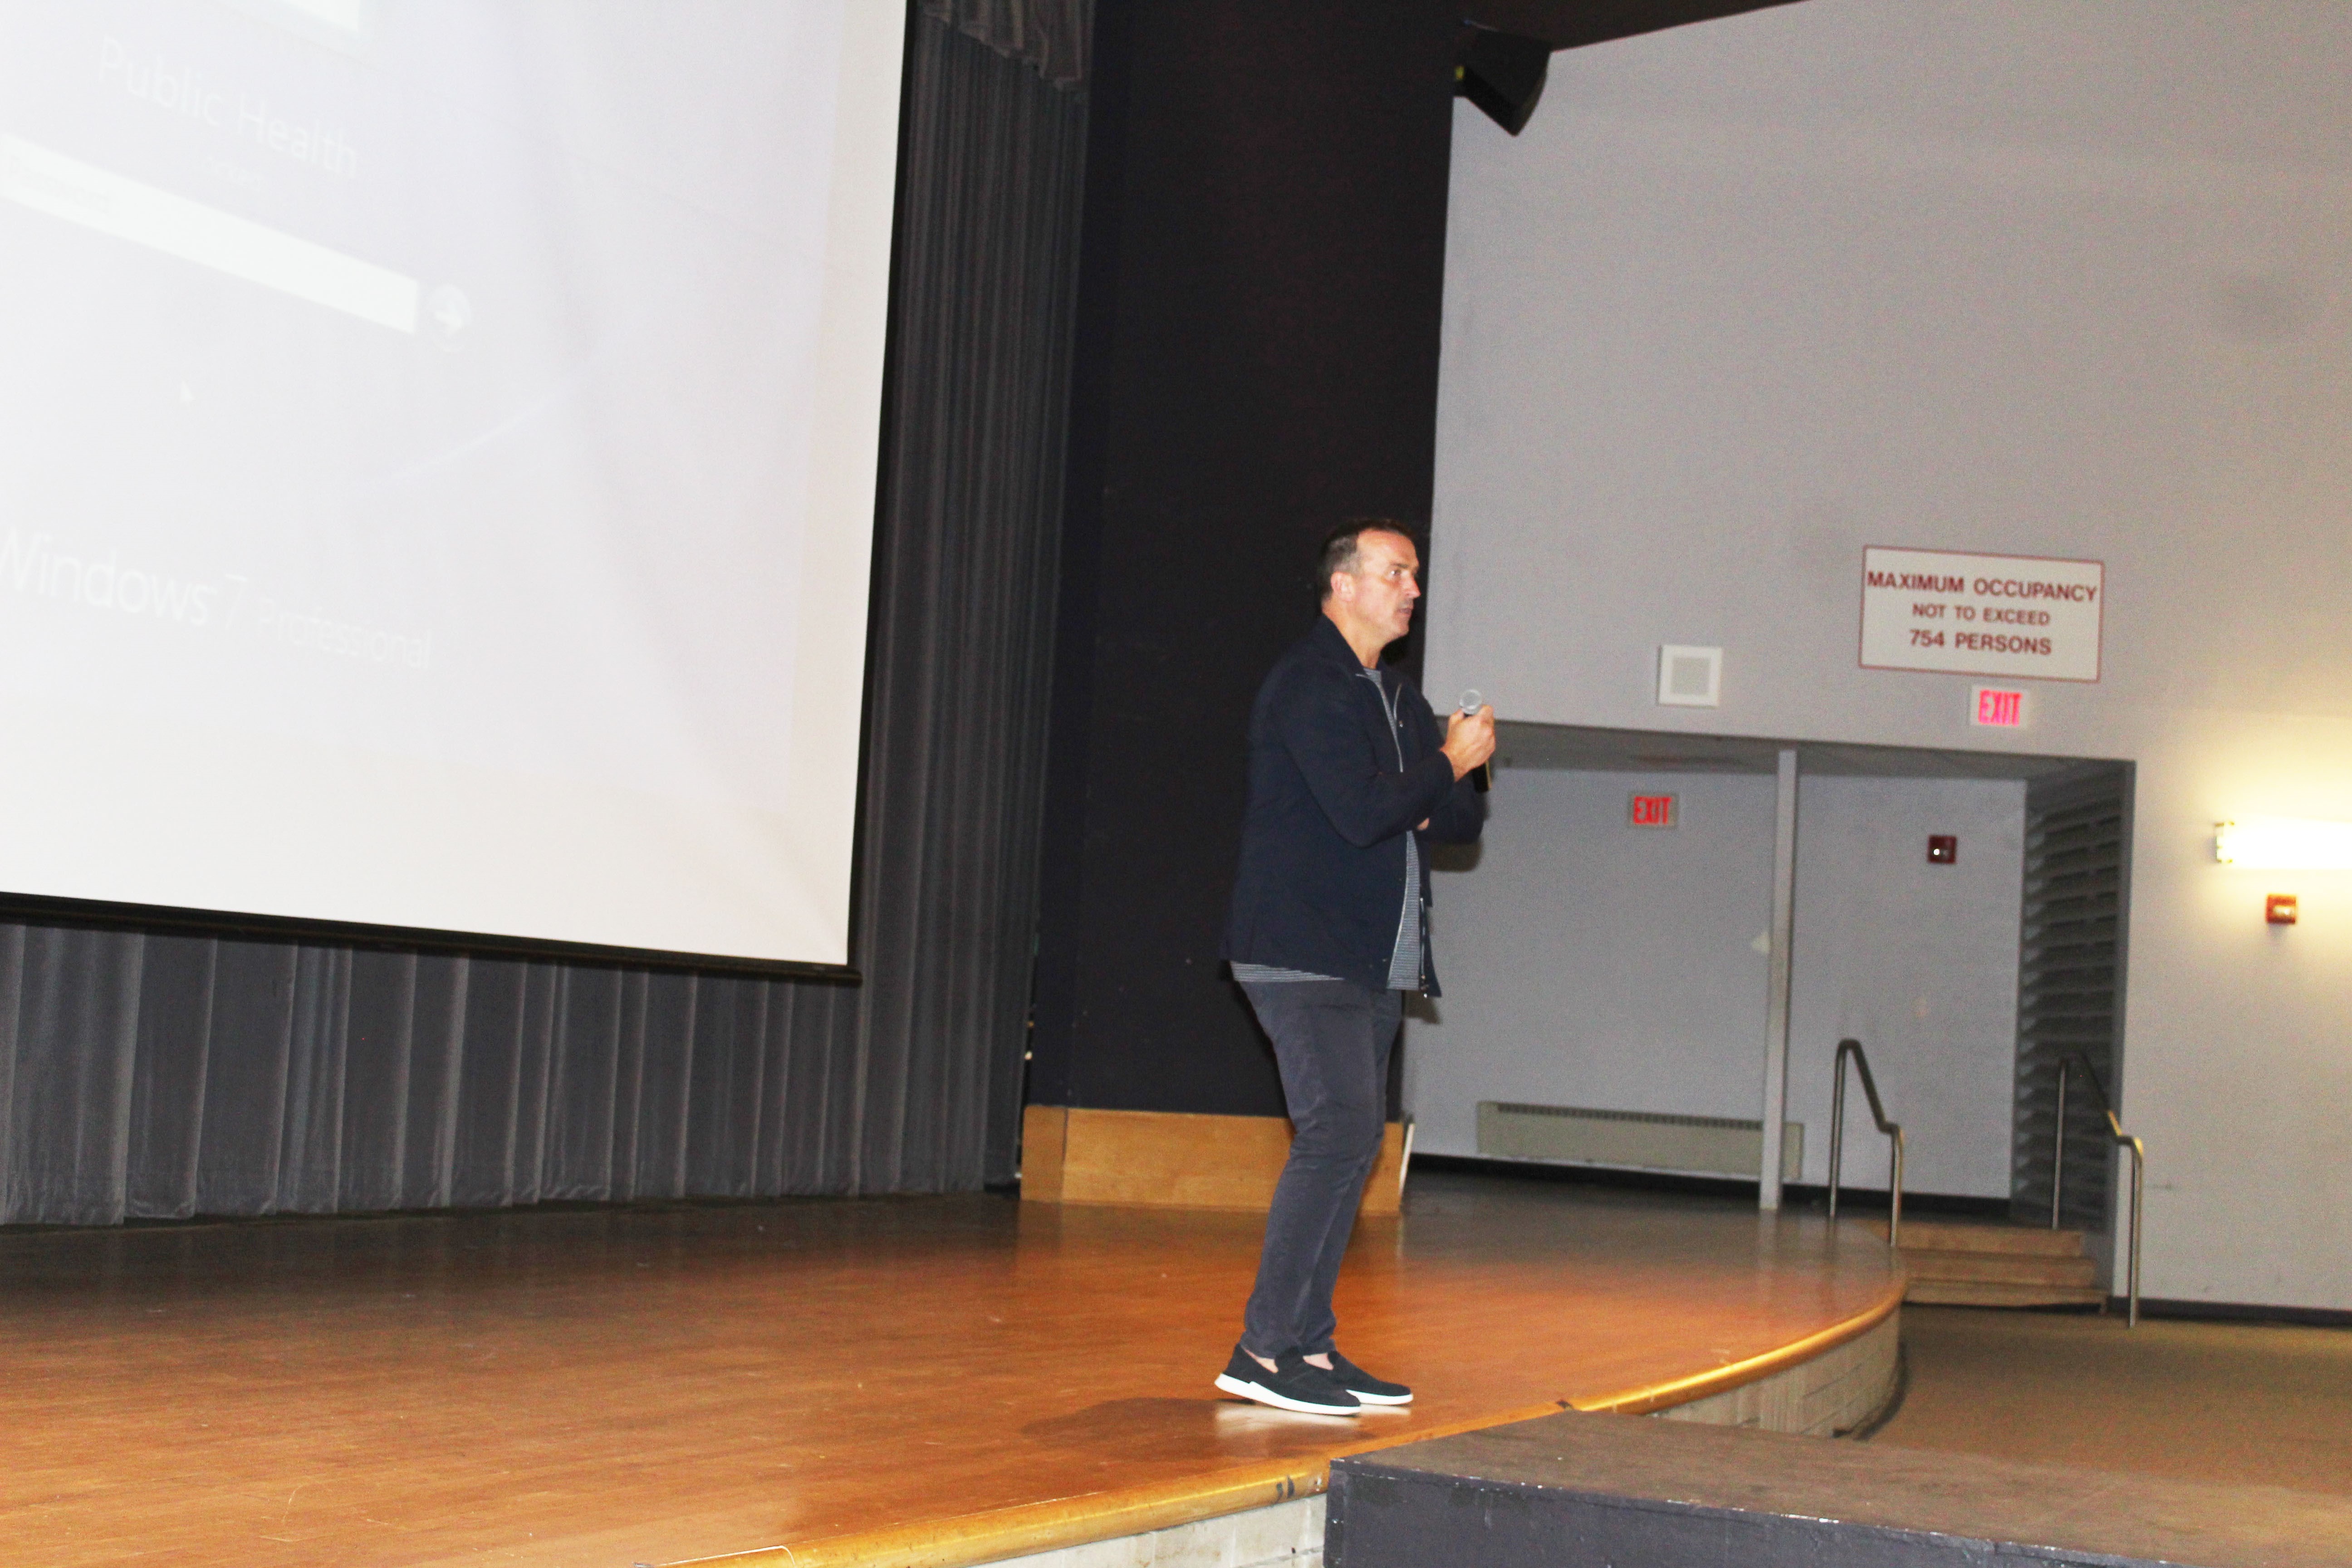 Former professional basketball player Chris Herren pictured Thursday speaking
about recovery at the Amsterdam High
School auditorium.